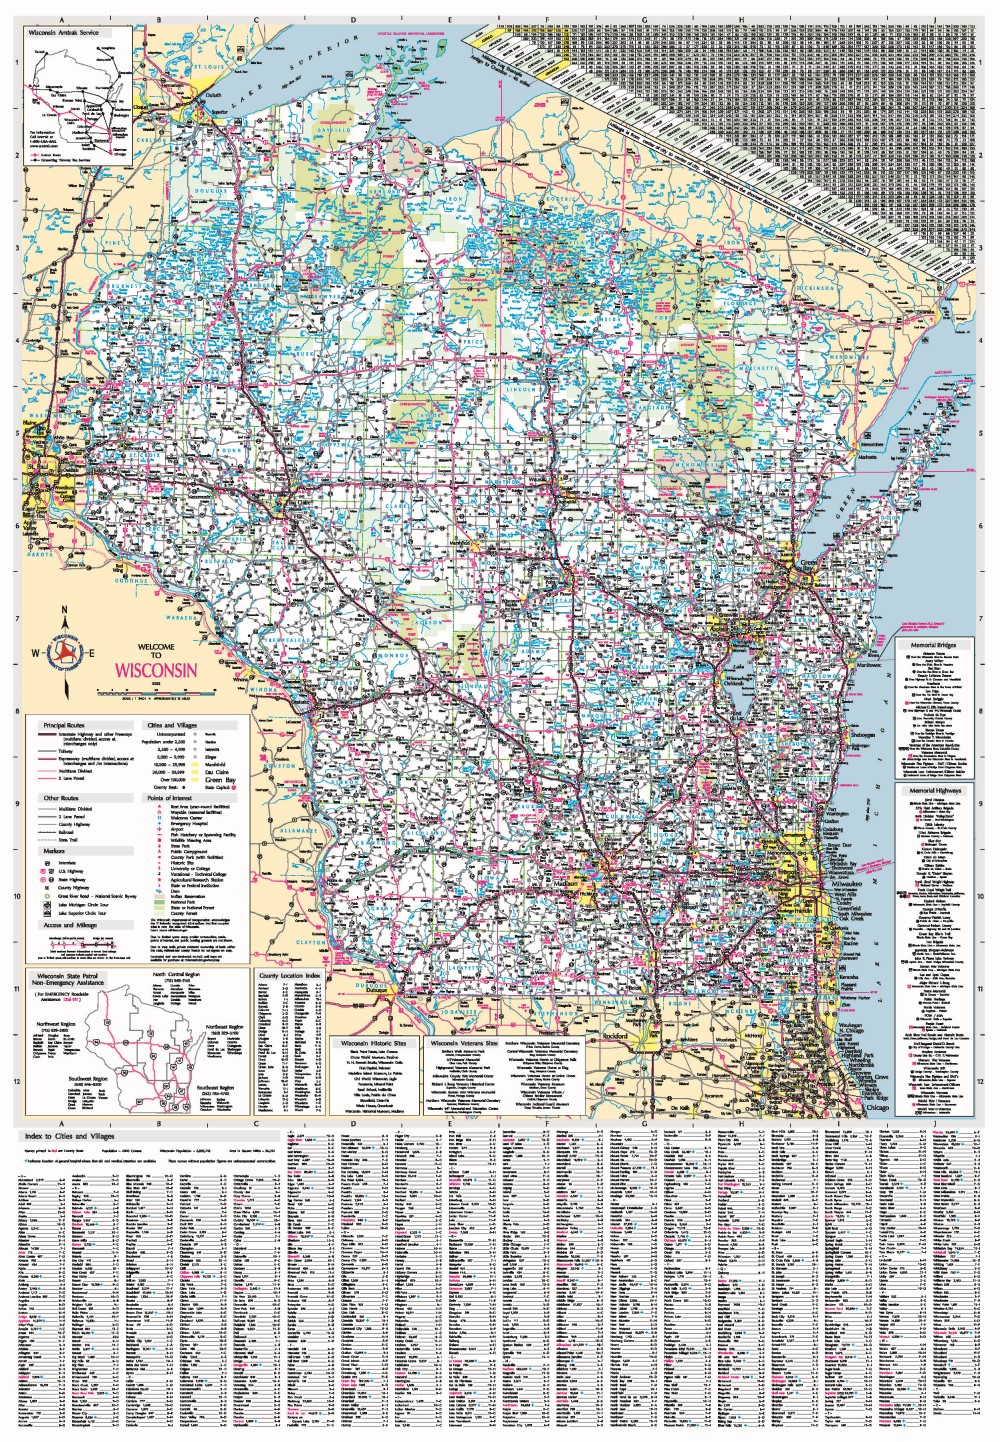 Map of Wisconsin state highways